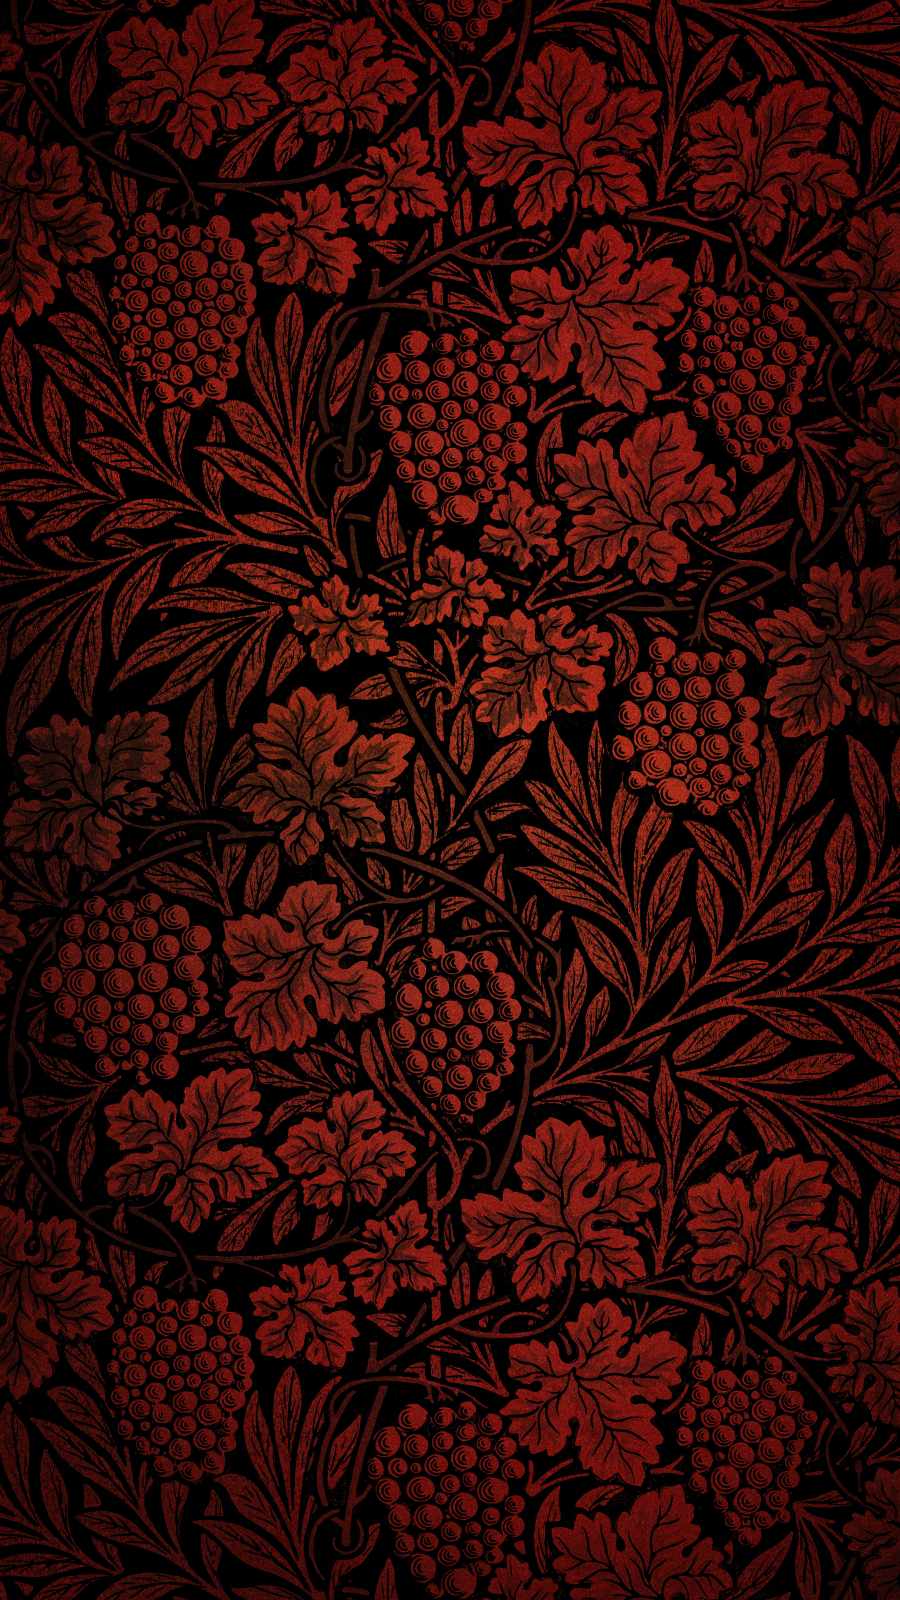 Red Foliage Design iPhone Wallpaper